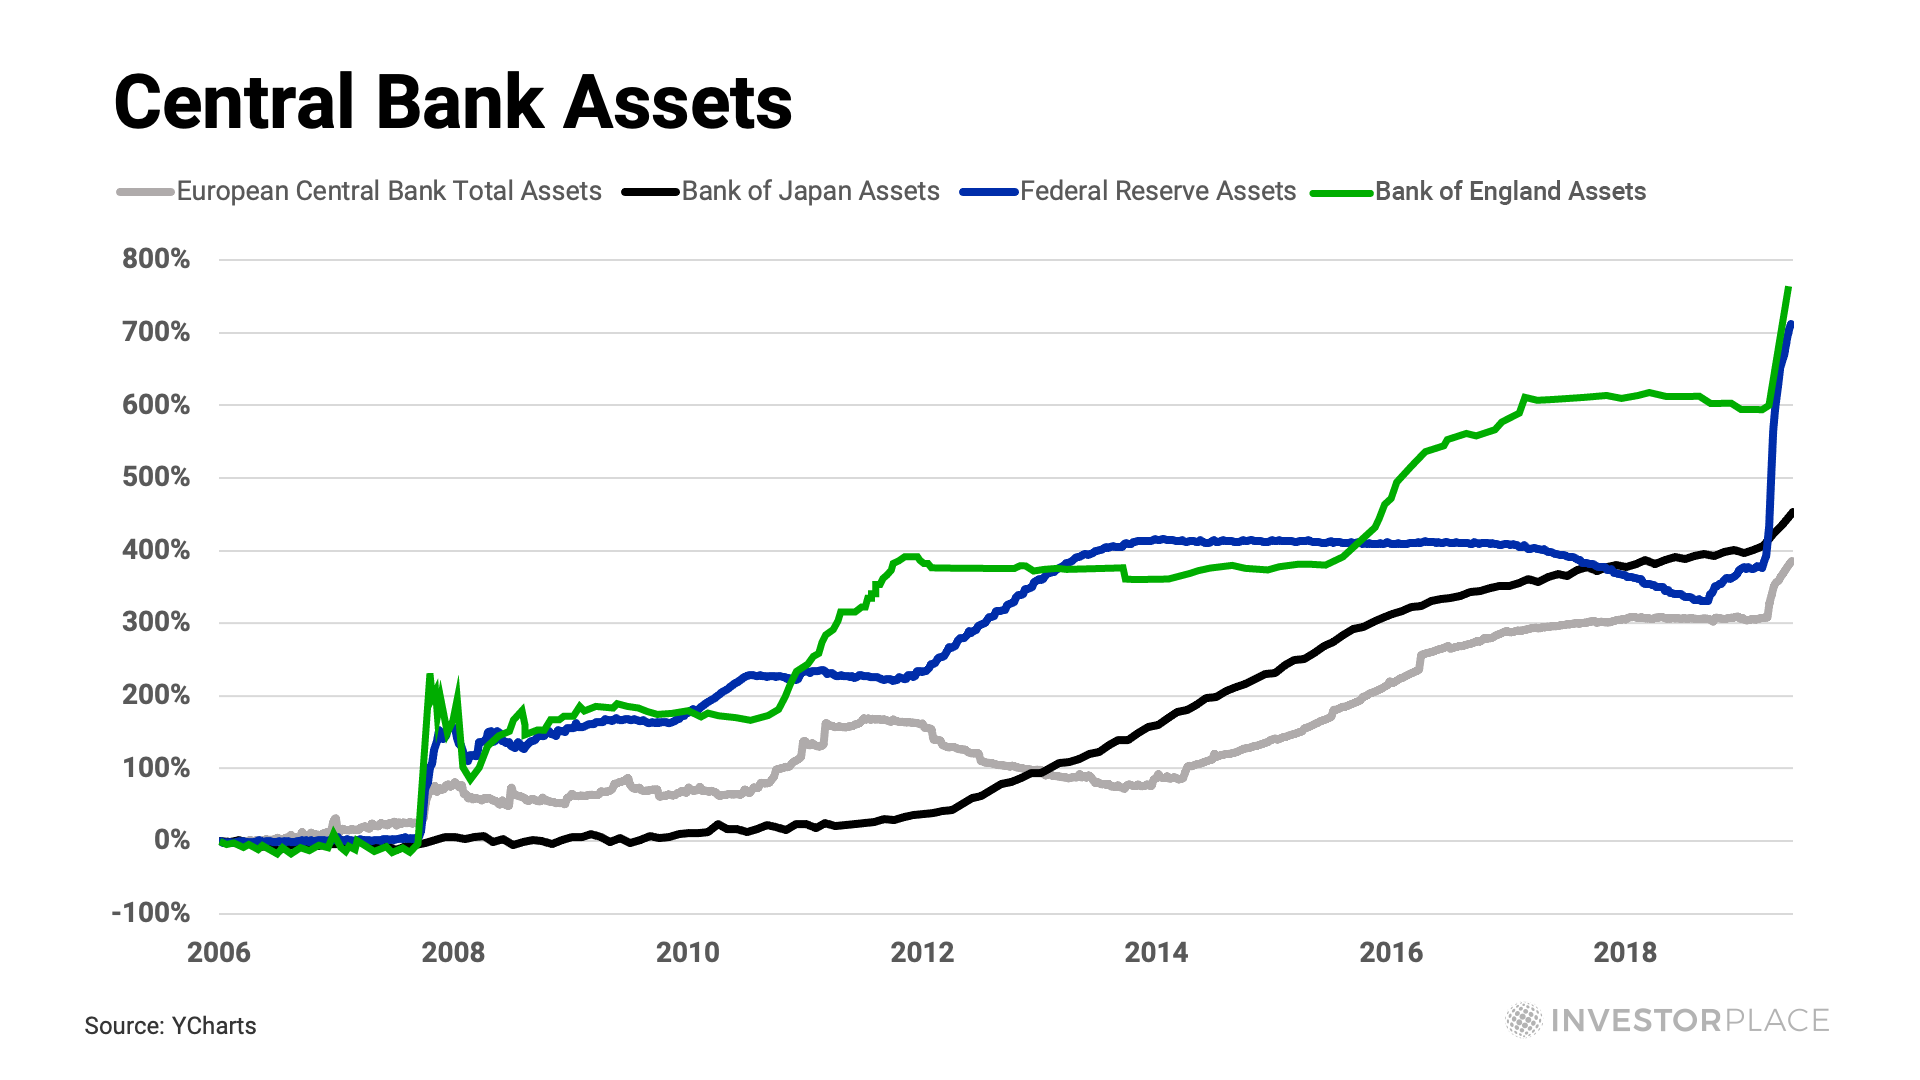 Image of central bank assets from 2006 to 2018. 